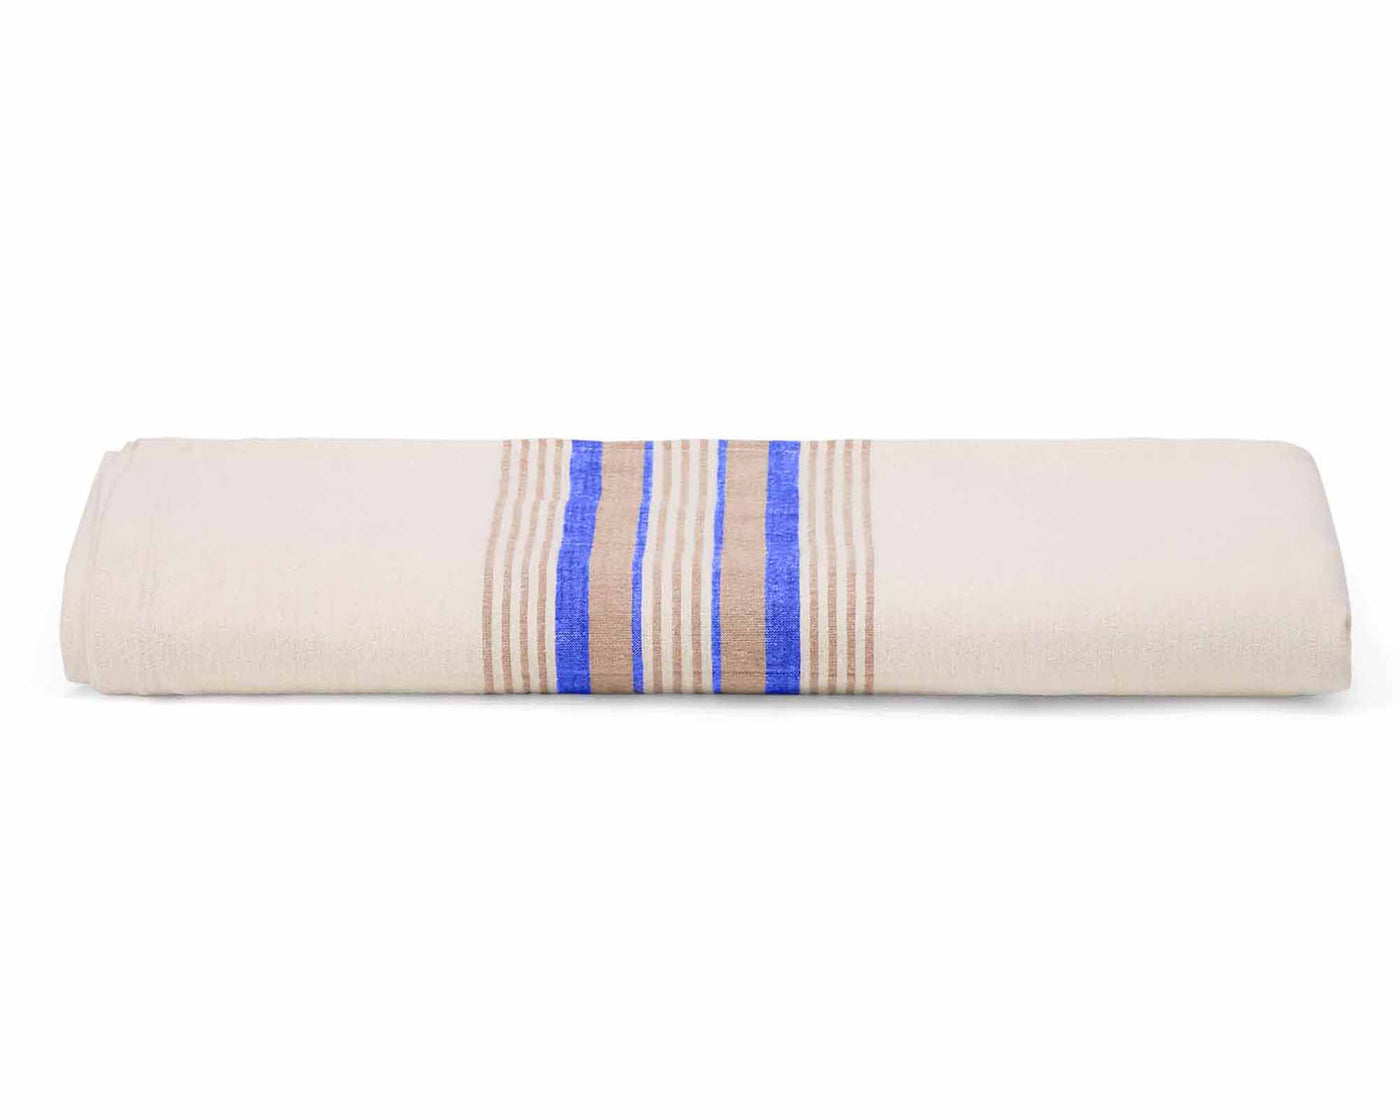 Blue Stripe IBEX comparable blanket